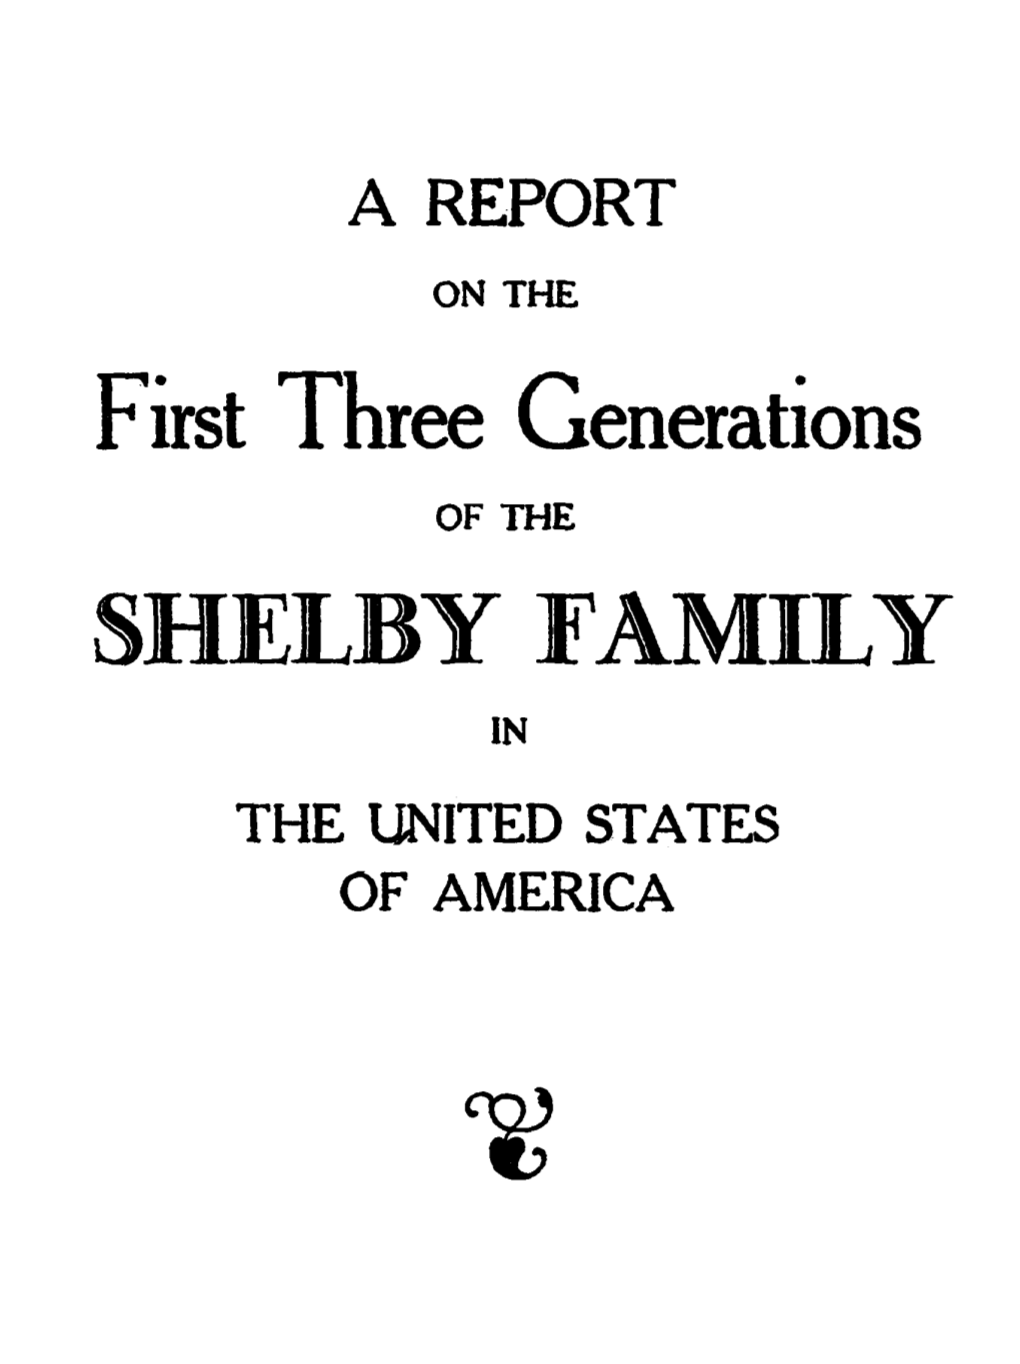 Shelby Family in the United States of America